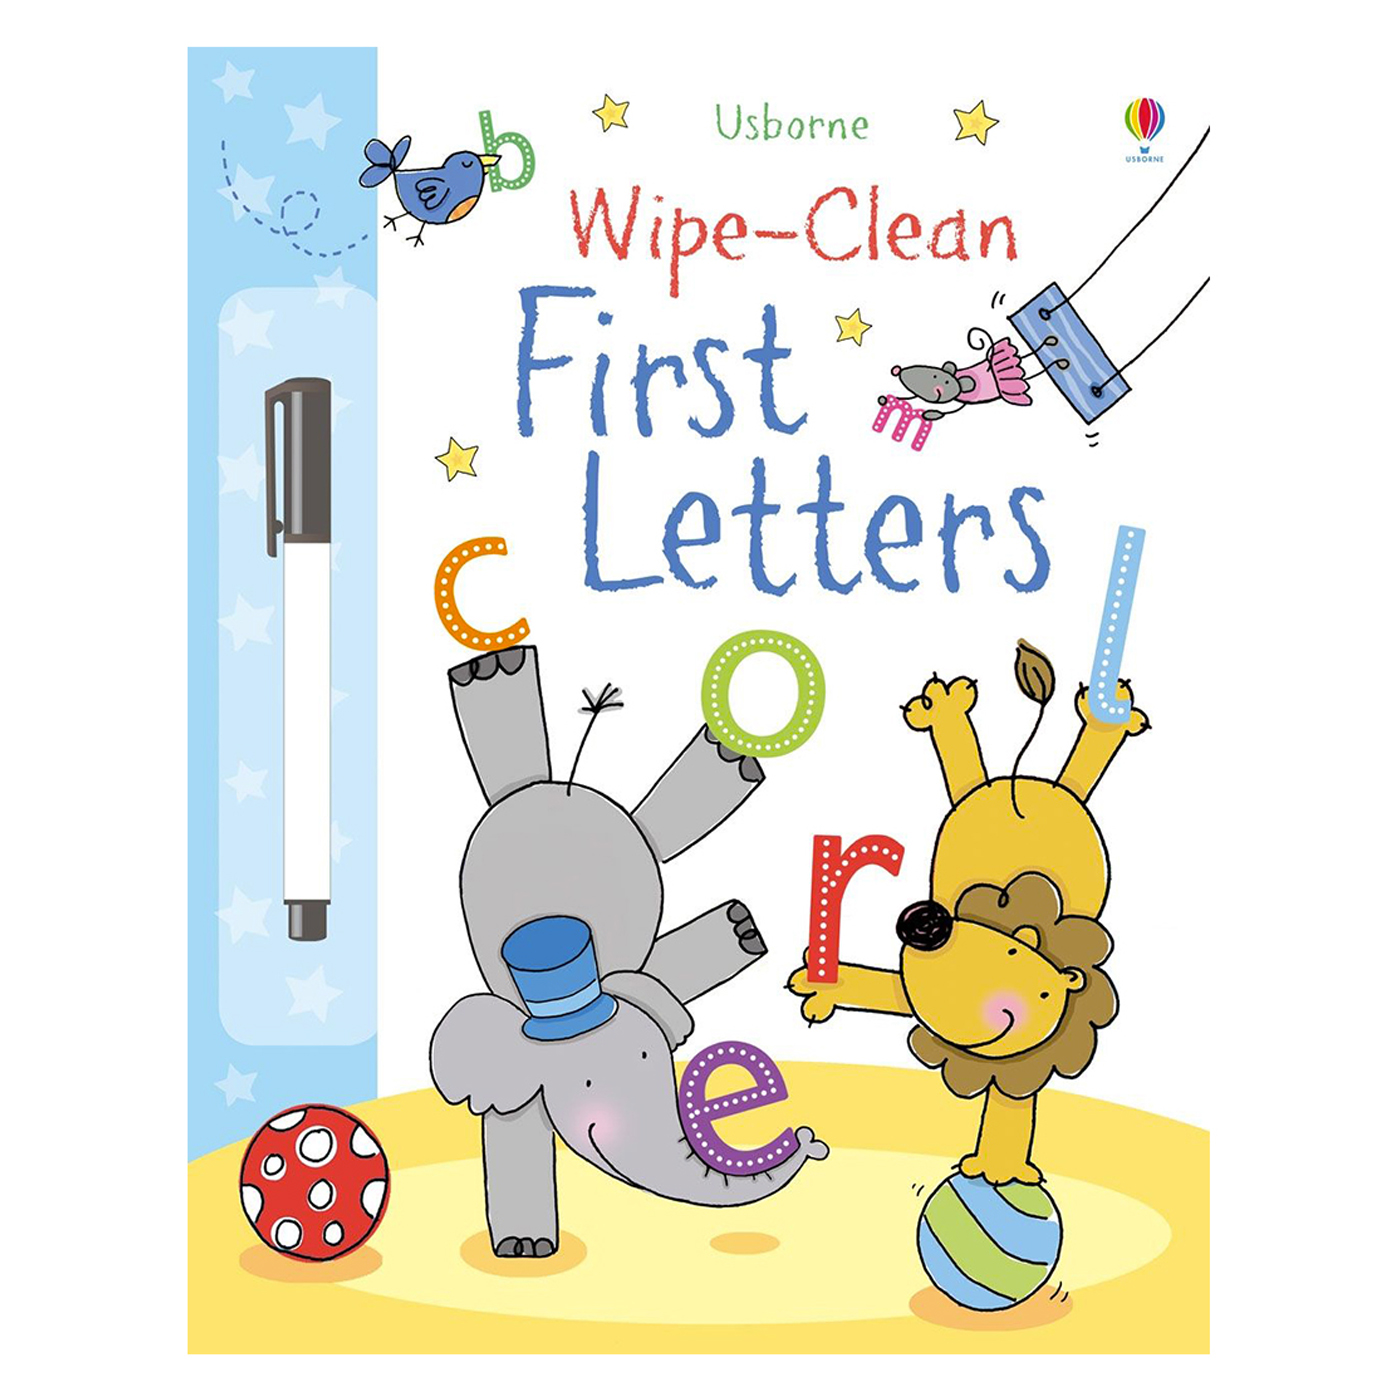  Wipe-Clean First Letters